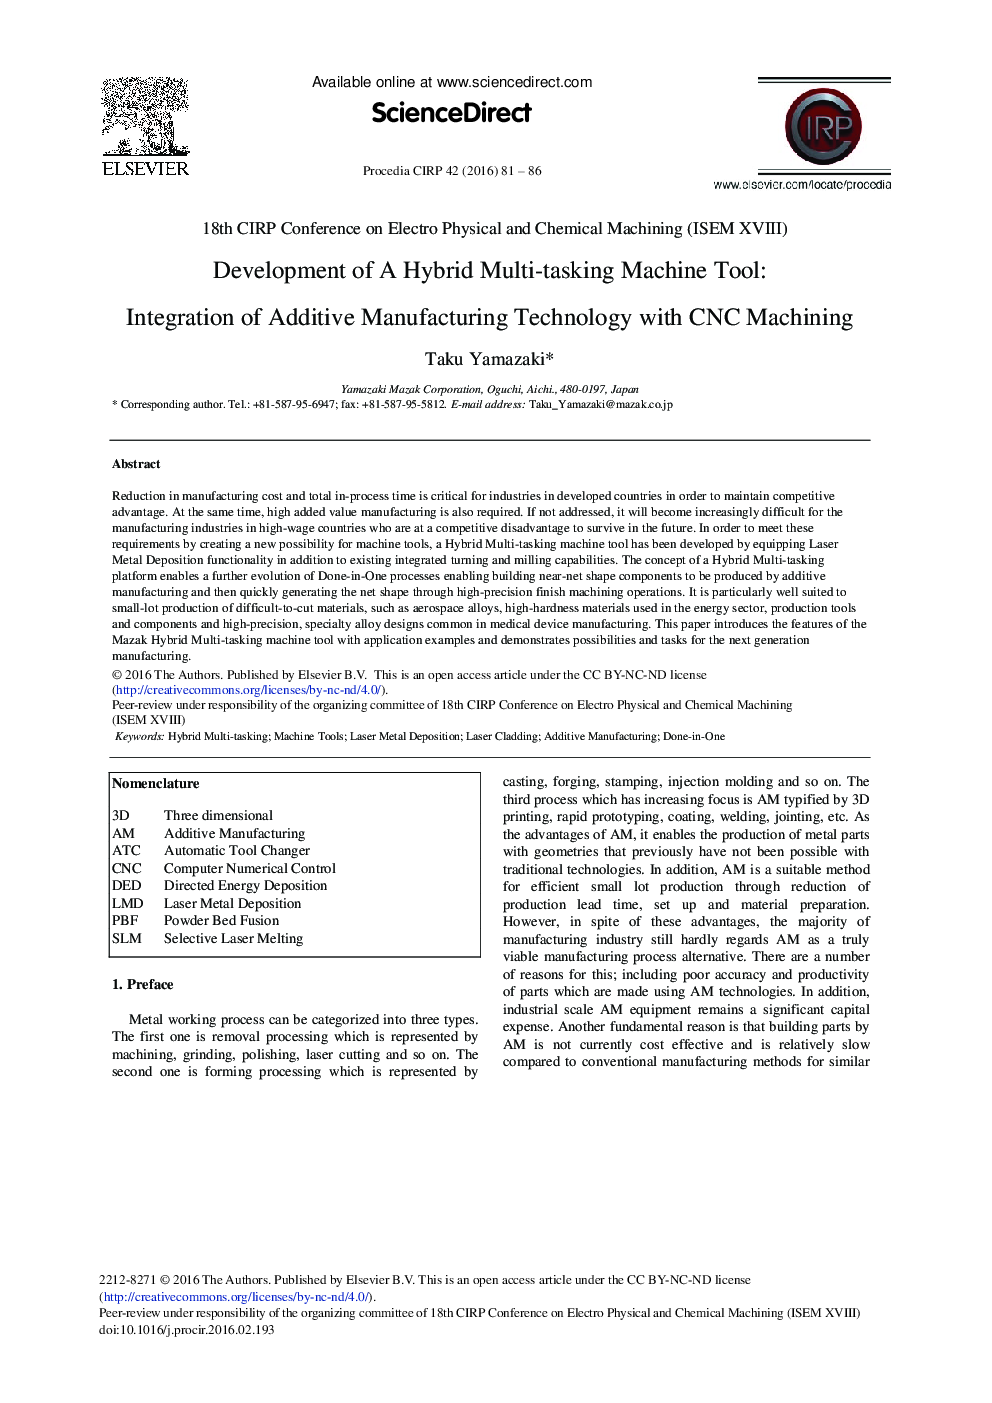 Development of A Hybrid Multi-tasking Machine Tool: Integration of Additive Manufacturing Technology with CNC Machining 